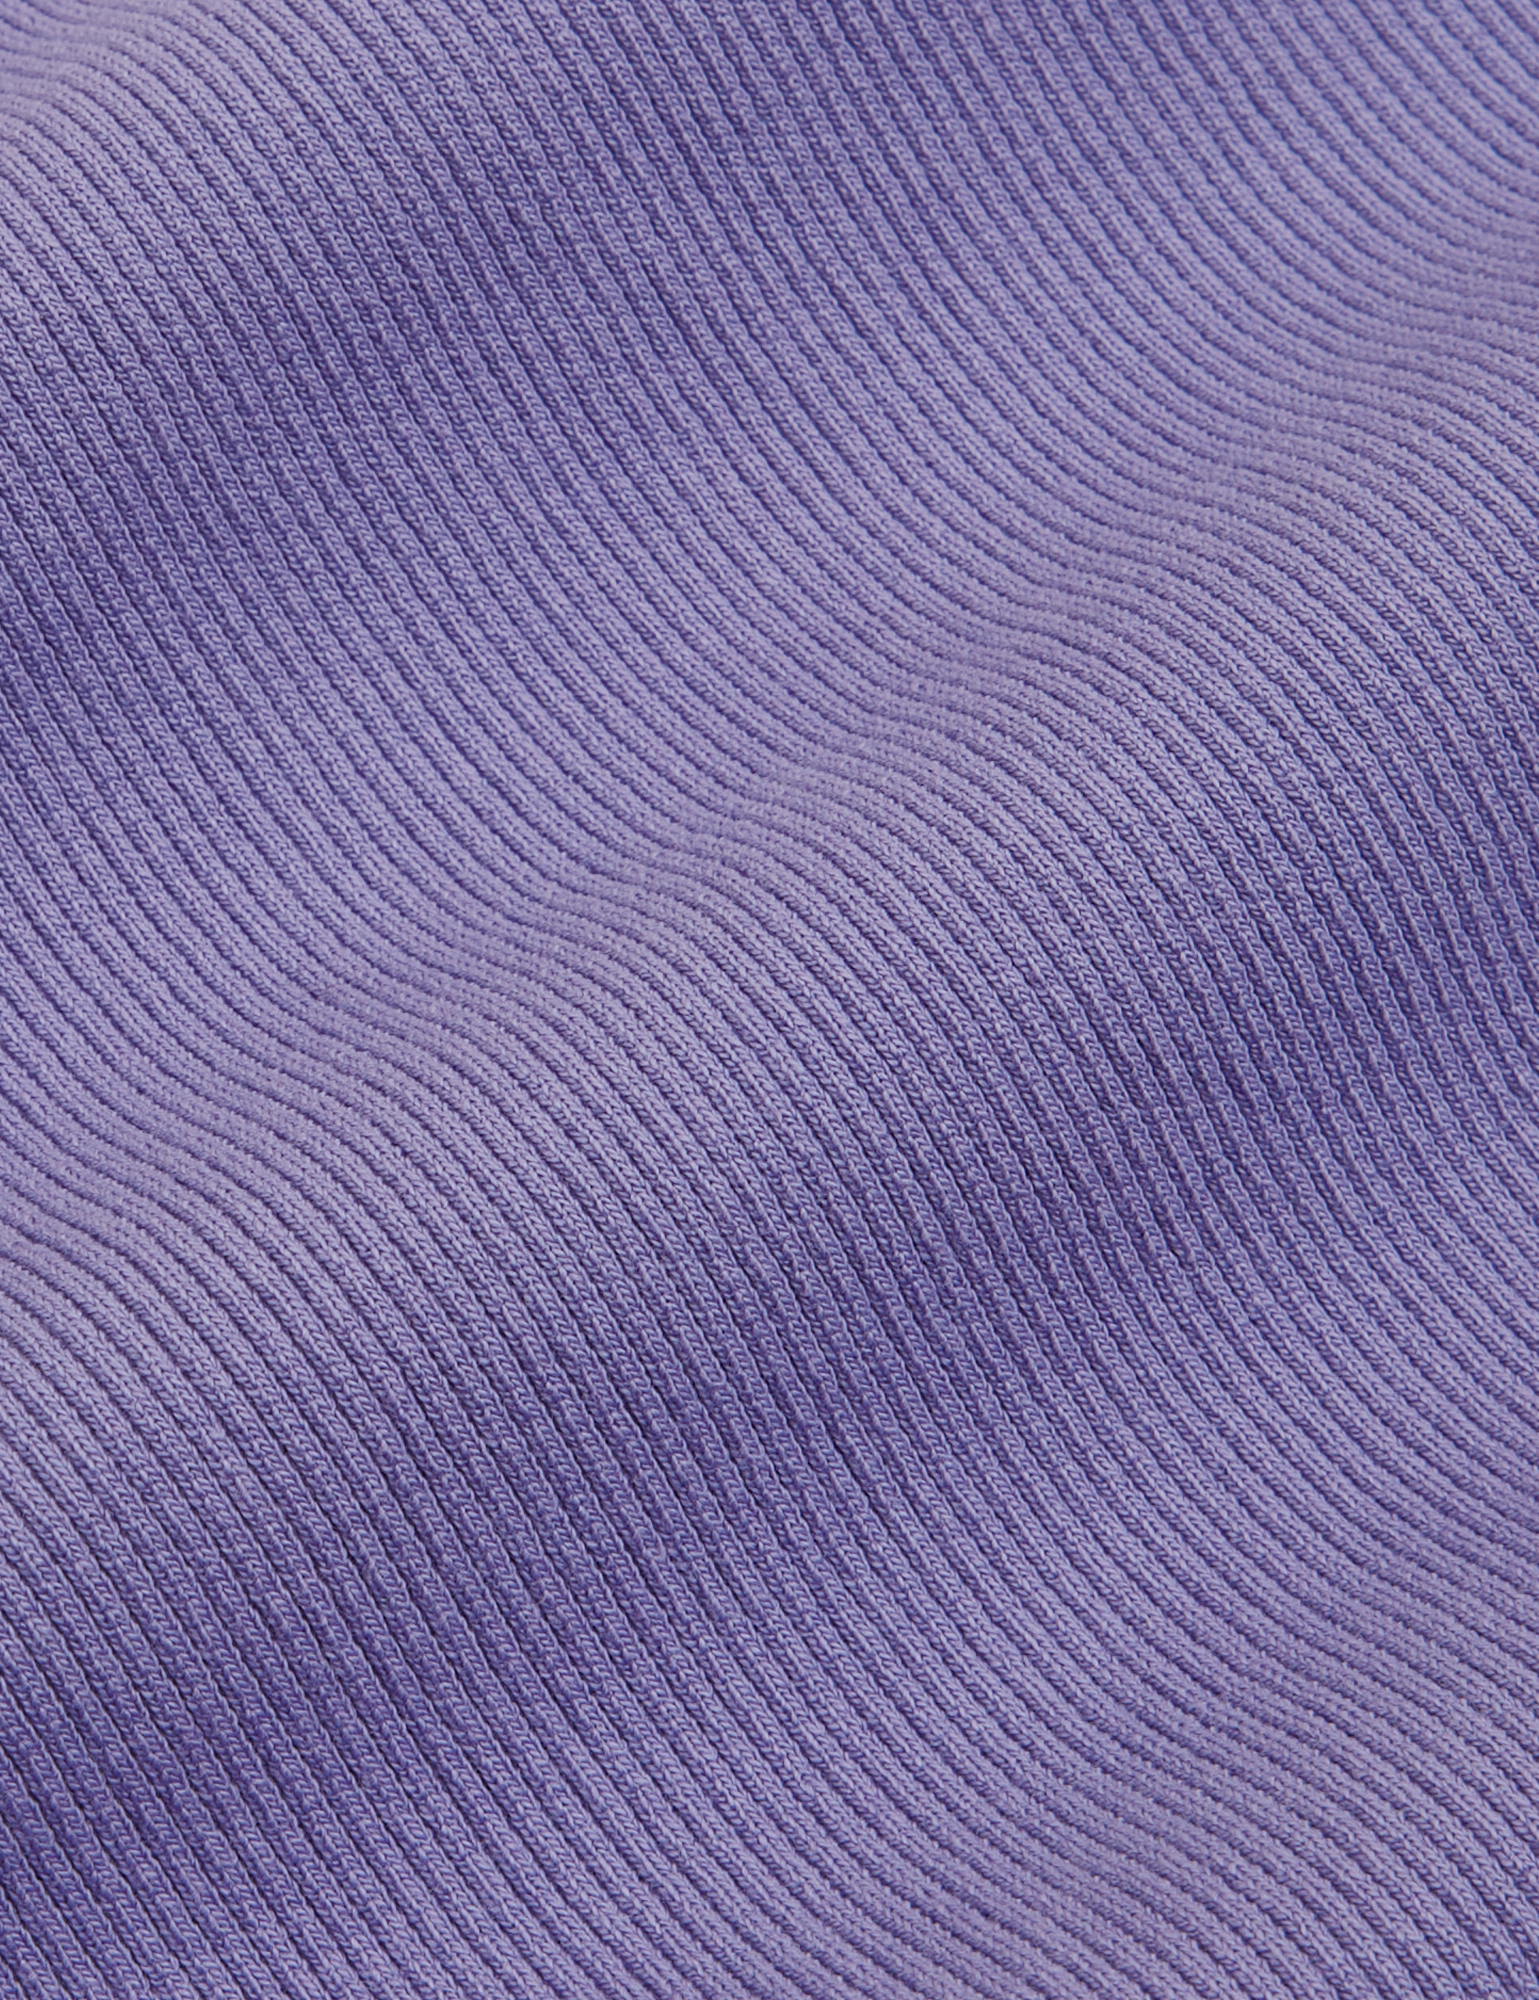 Sleeveless Essential Turtleneck in Faded Grape fabric detail